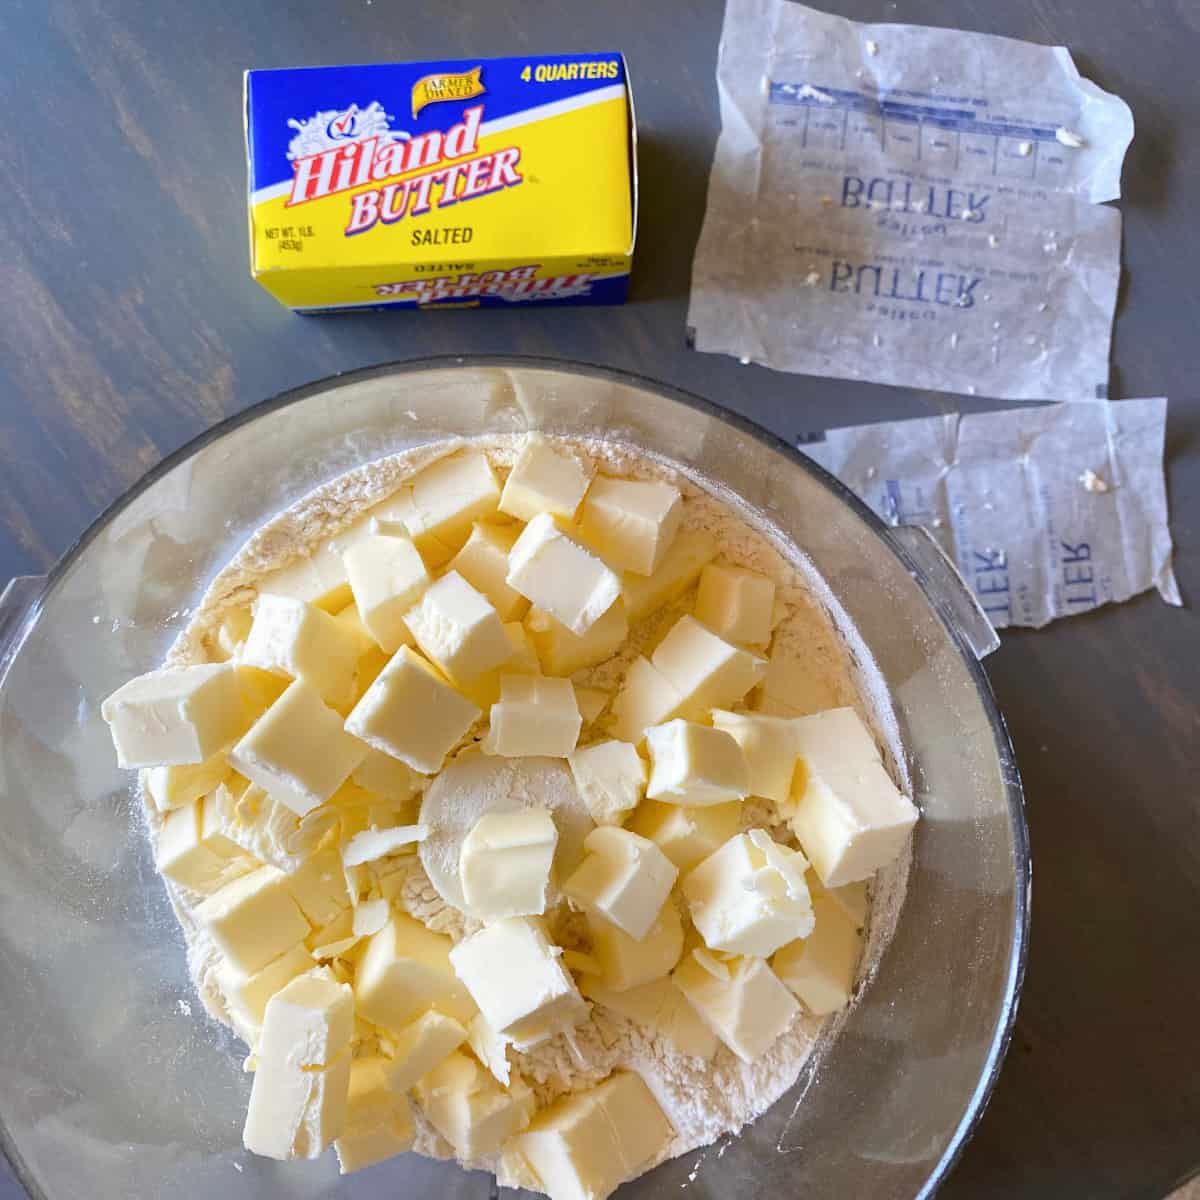 cubes of Hiland Dairy butter in a food processor in preparation for making homemade rough puff pastry